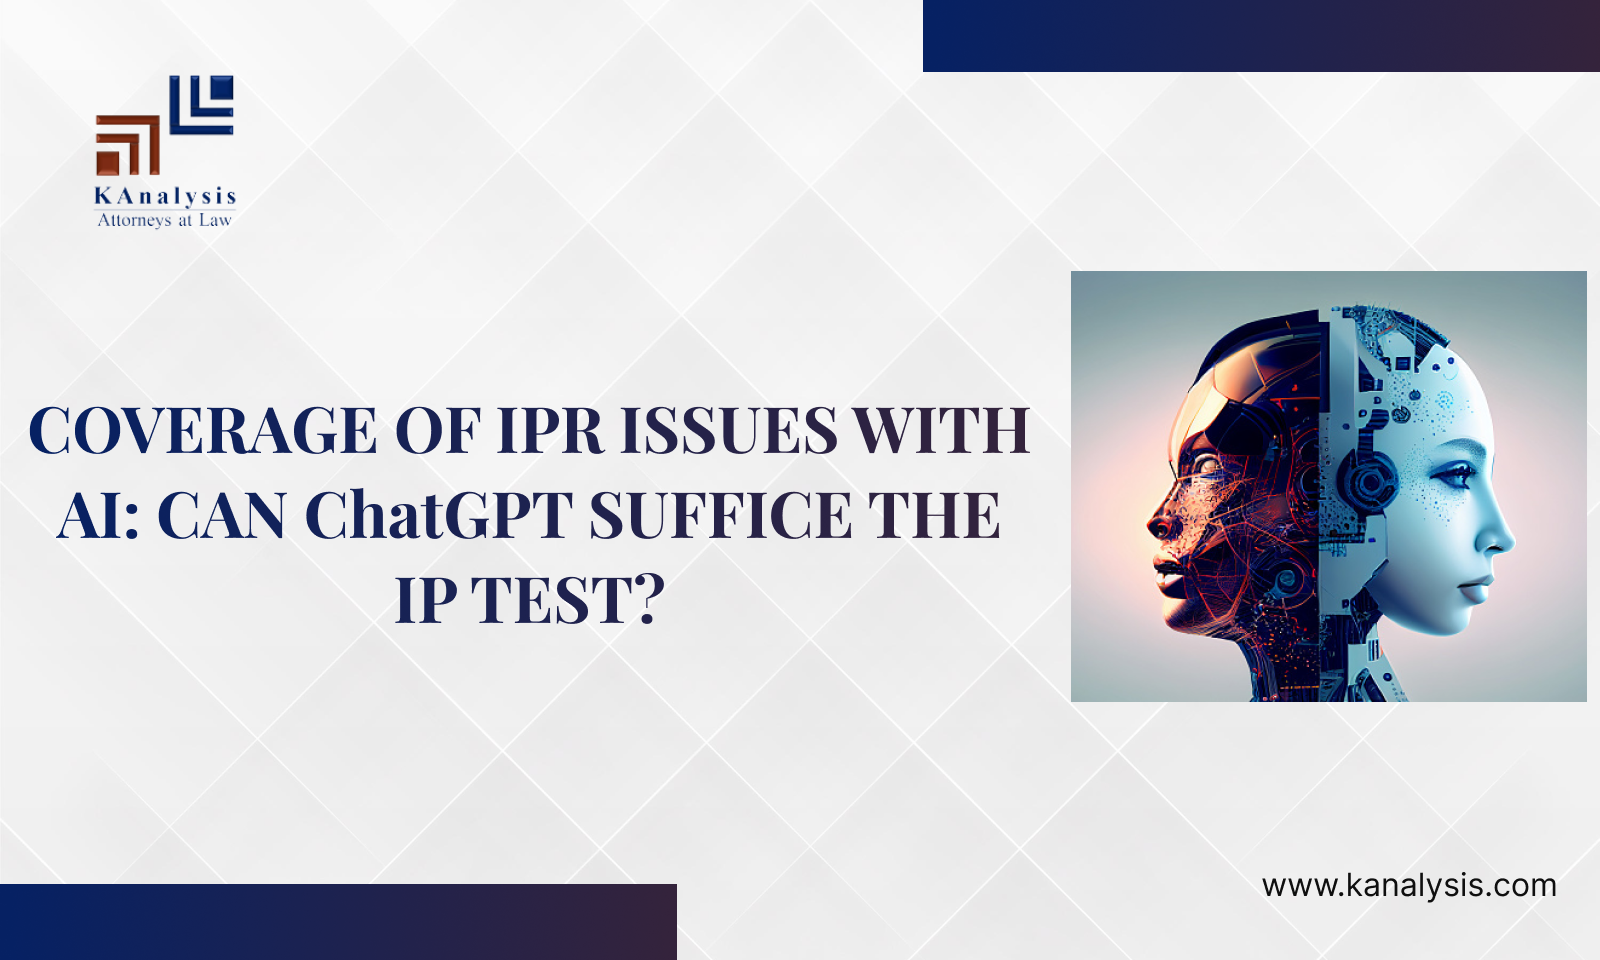 COVERAGE OF IPR ISSUES WITH AI: CAN ChatGPT SUFFICE THE IP TEST?